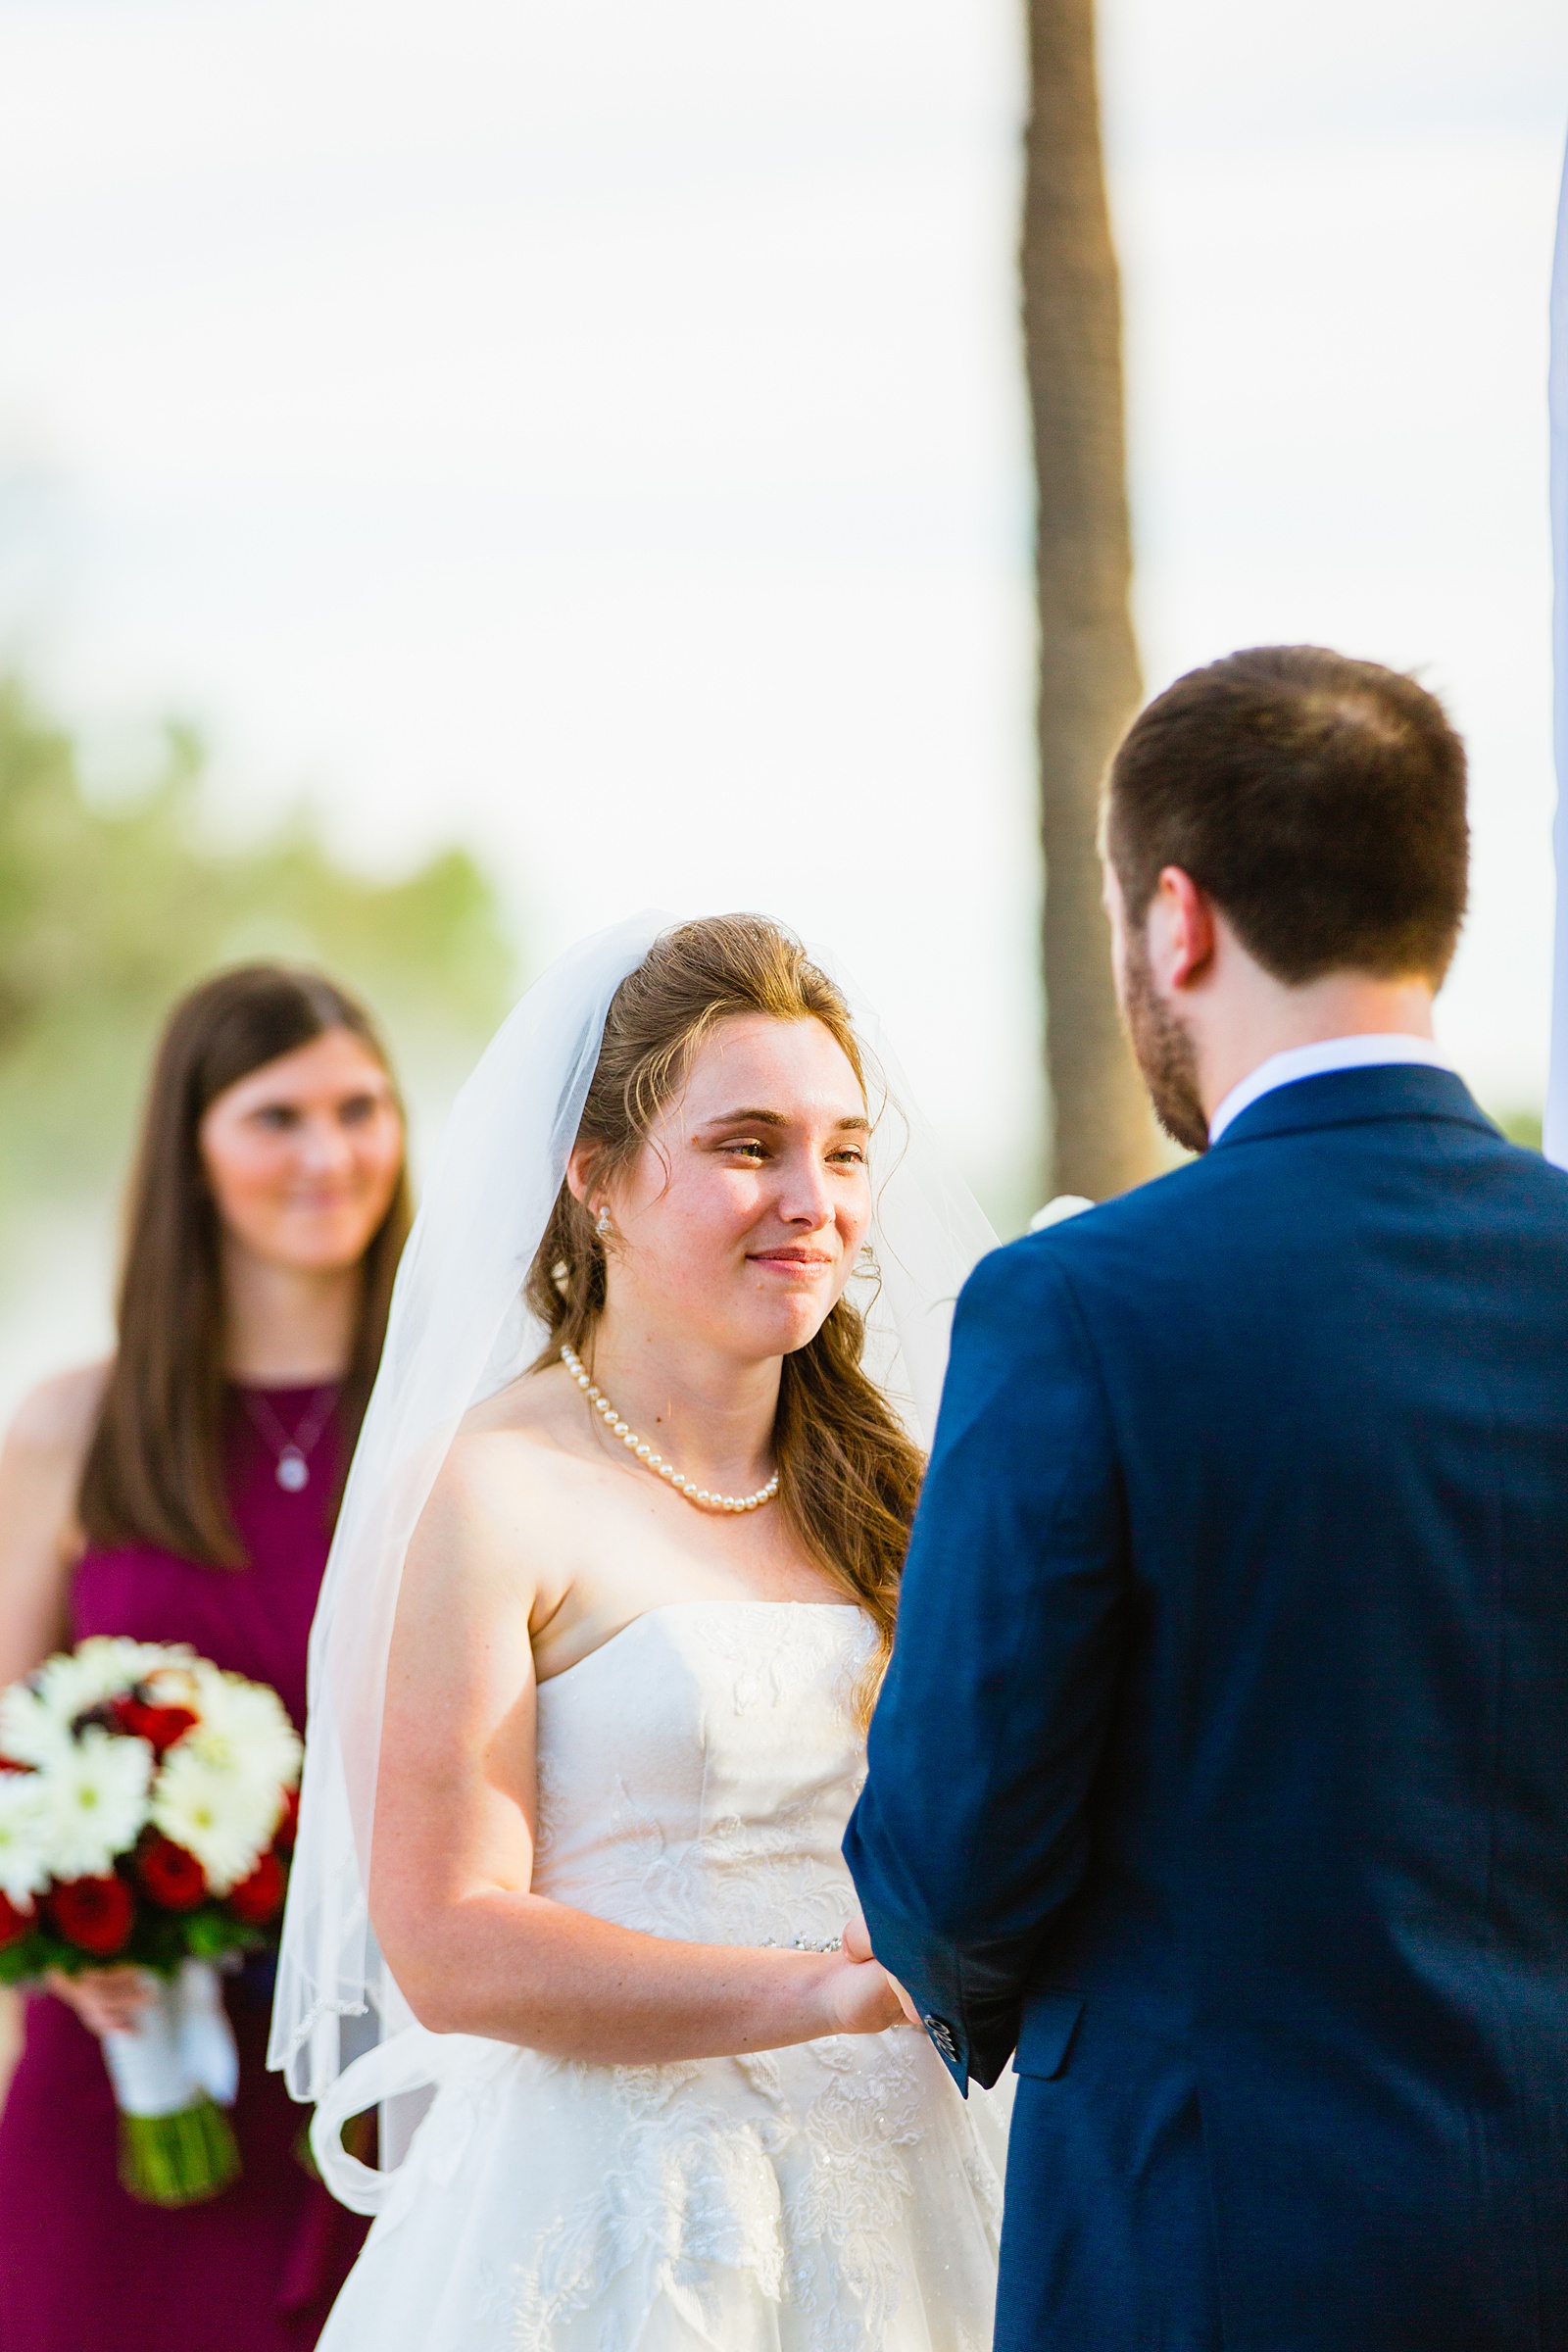 Bride looking at her groom during their wedding ceremony at Ocotillo Oasis by Phoenix wedding photographer PMA Photography.